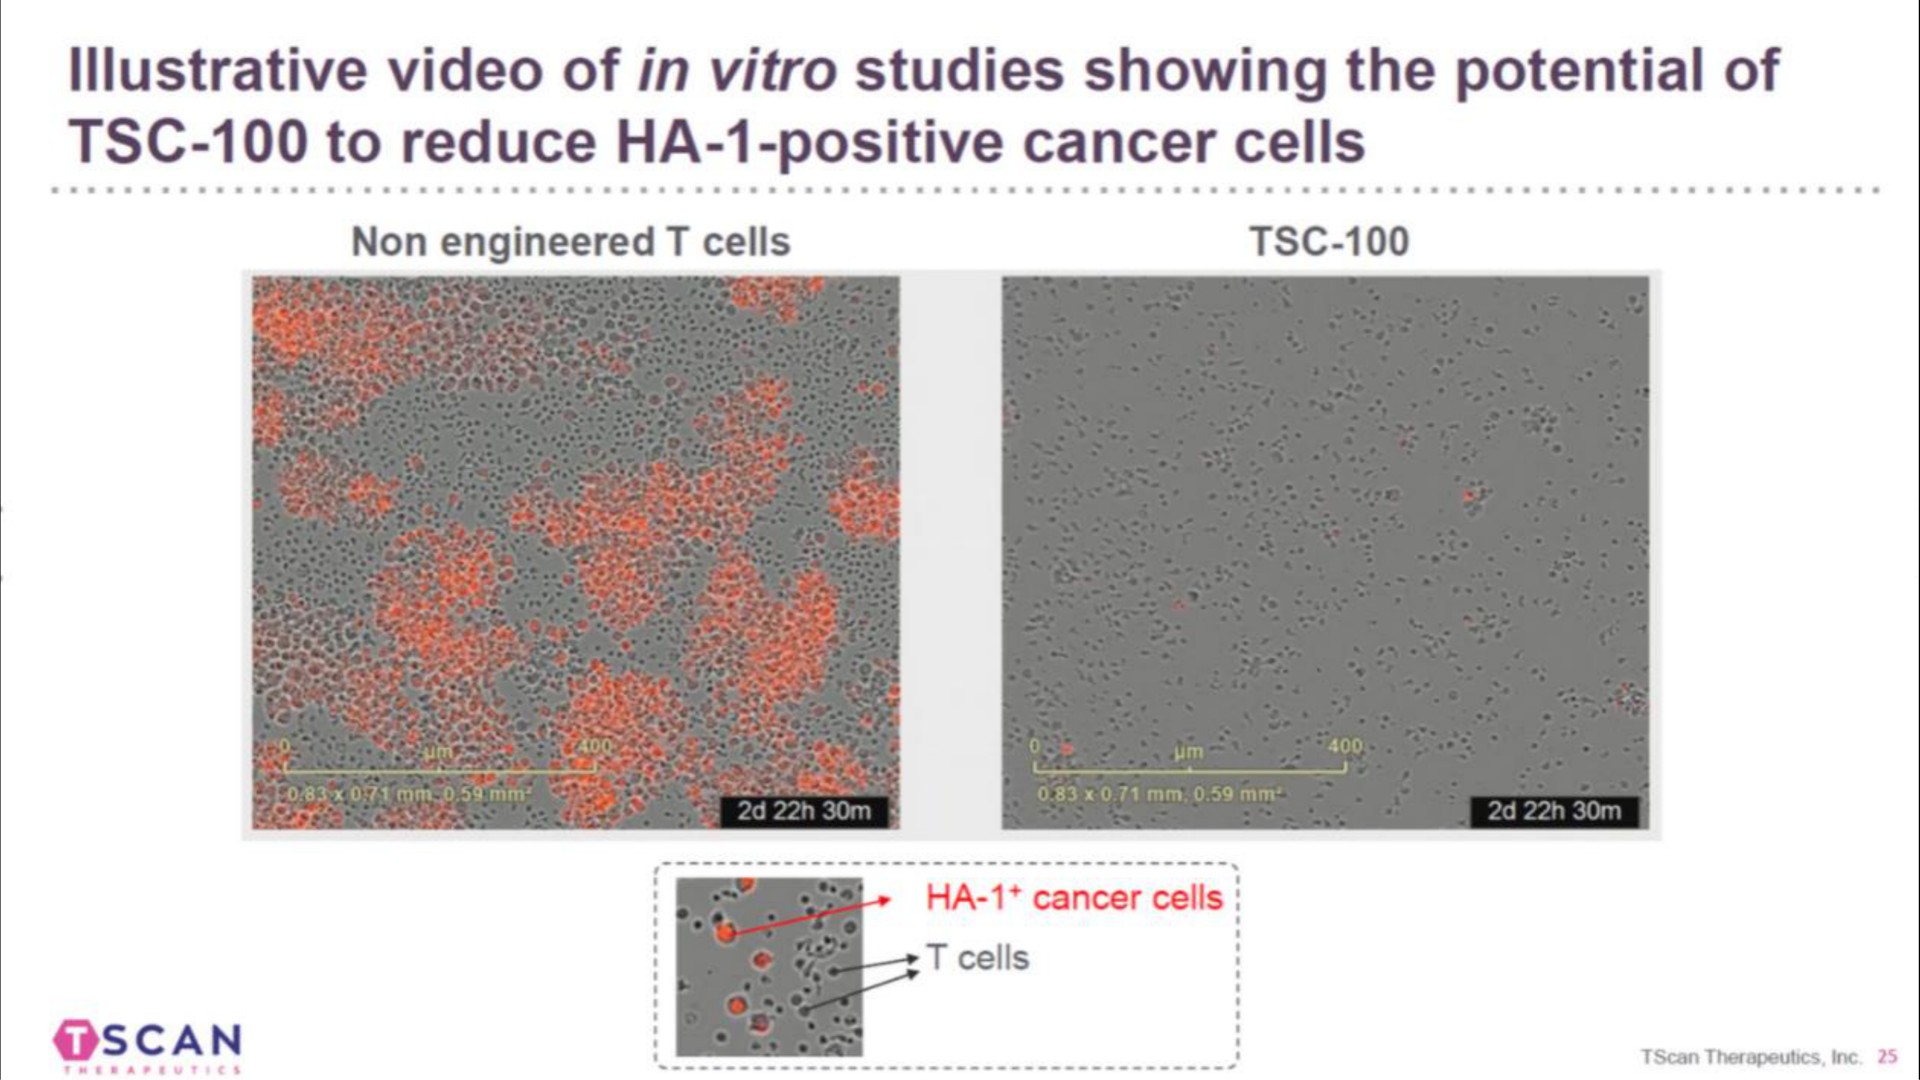 illustrative video of in studies showing the potential of to reduce positive cancer cells | TScan Therapeutics